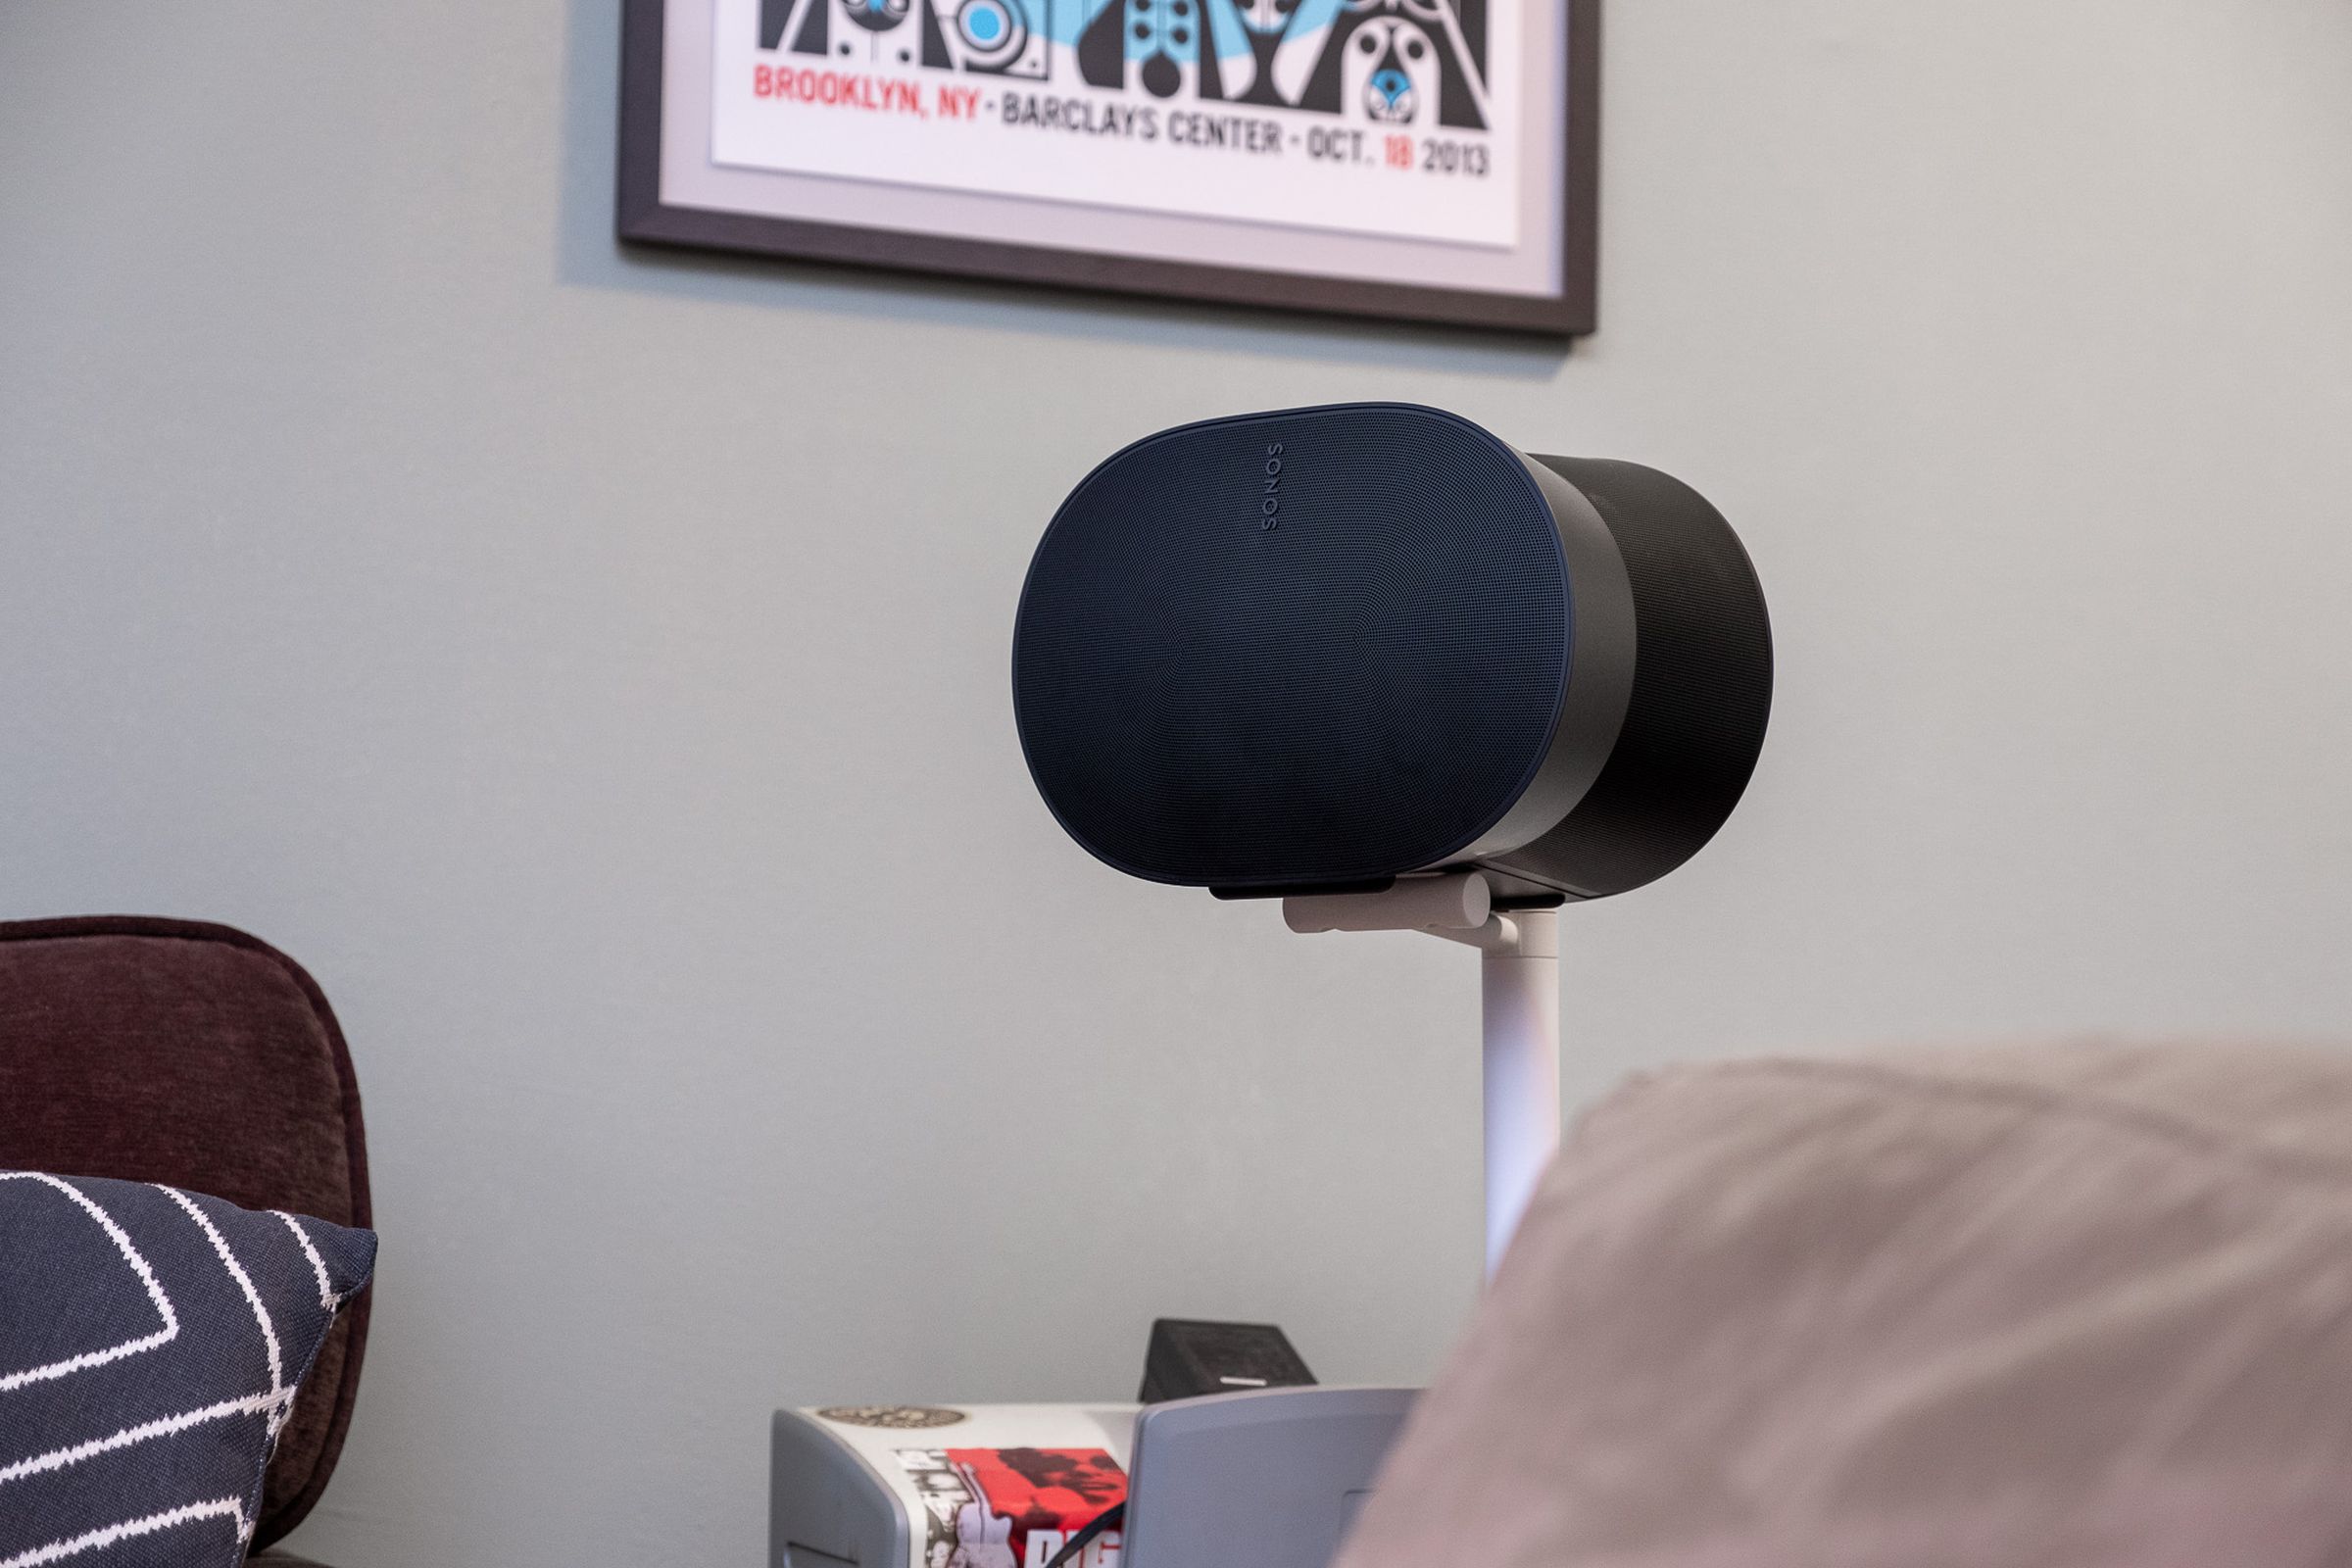 A photo of the Sonos Era 300 speaker attached to a floor stand.